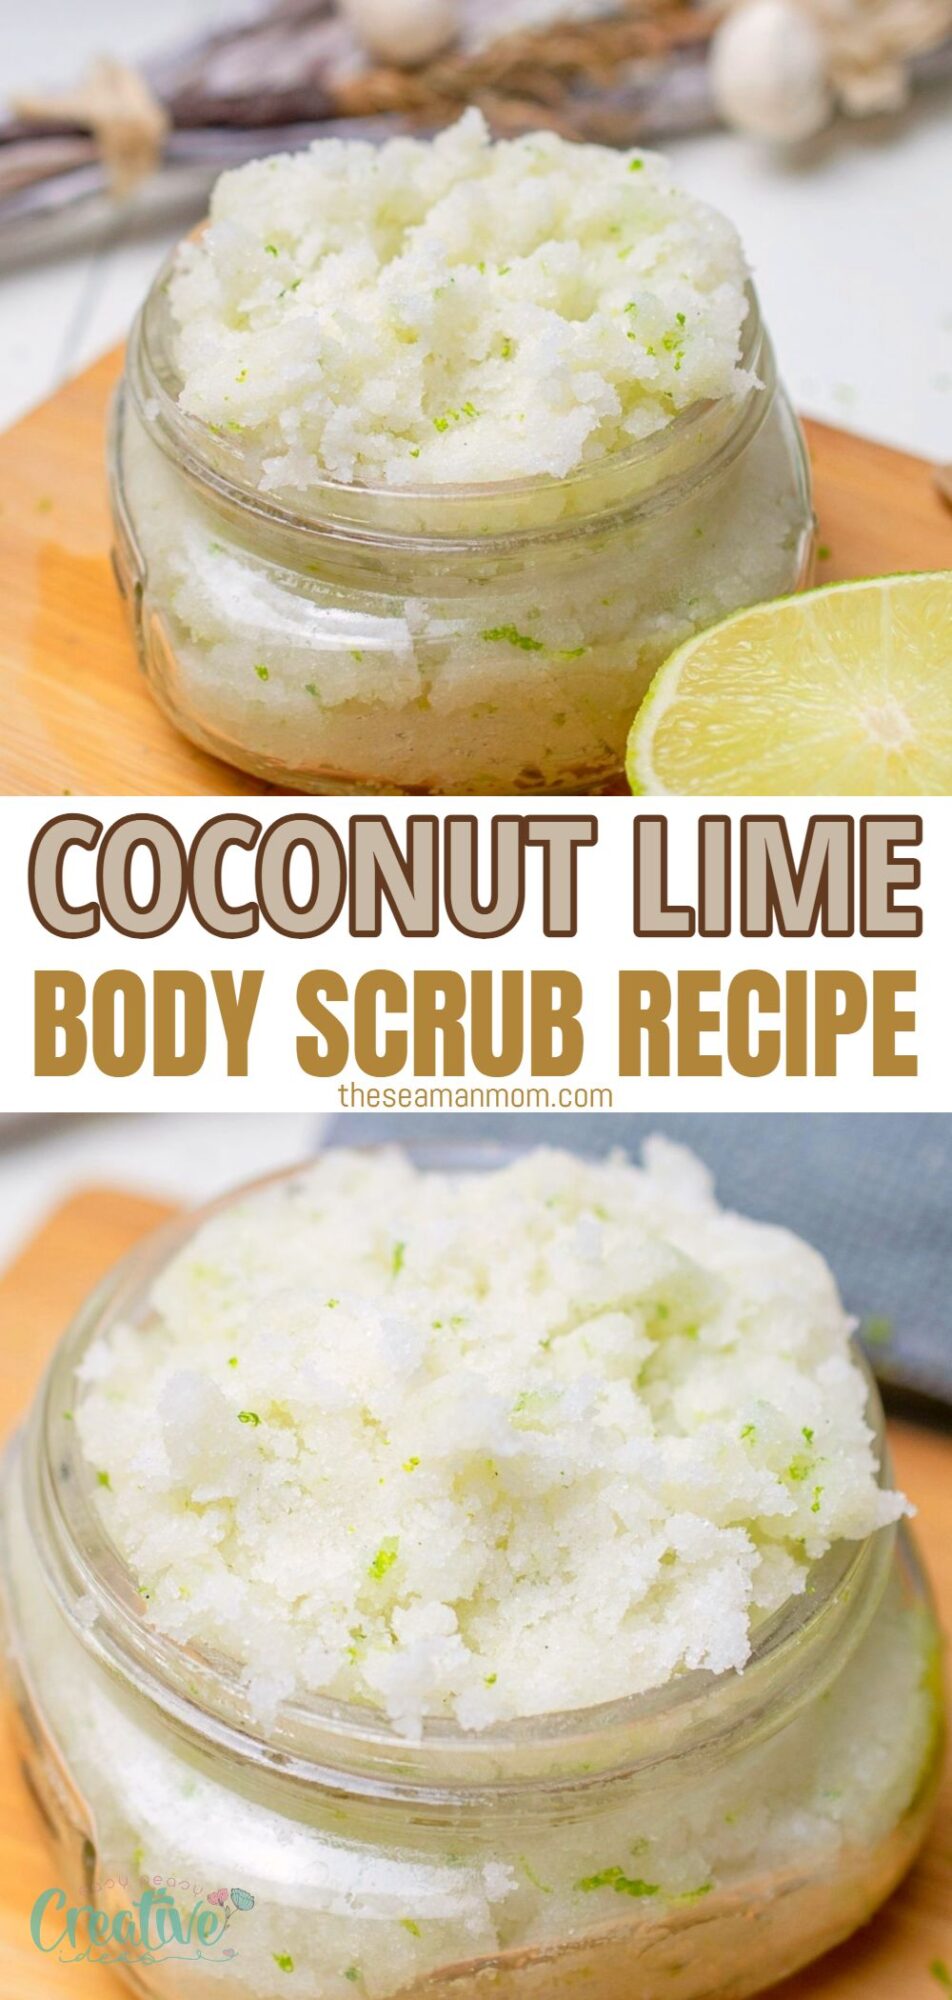 Homemade coconut lime body scrub recipe for glowing, smooth skin. Exfoliate with lime sugar scrub and moisturize with coconut oil.